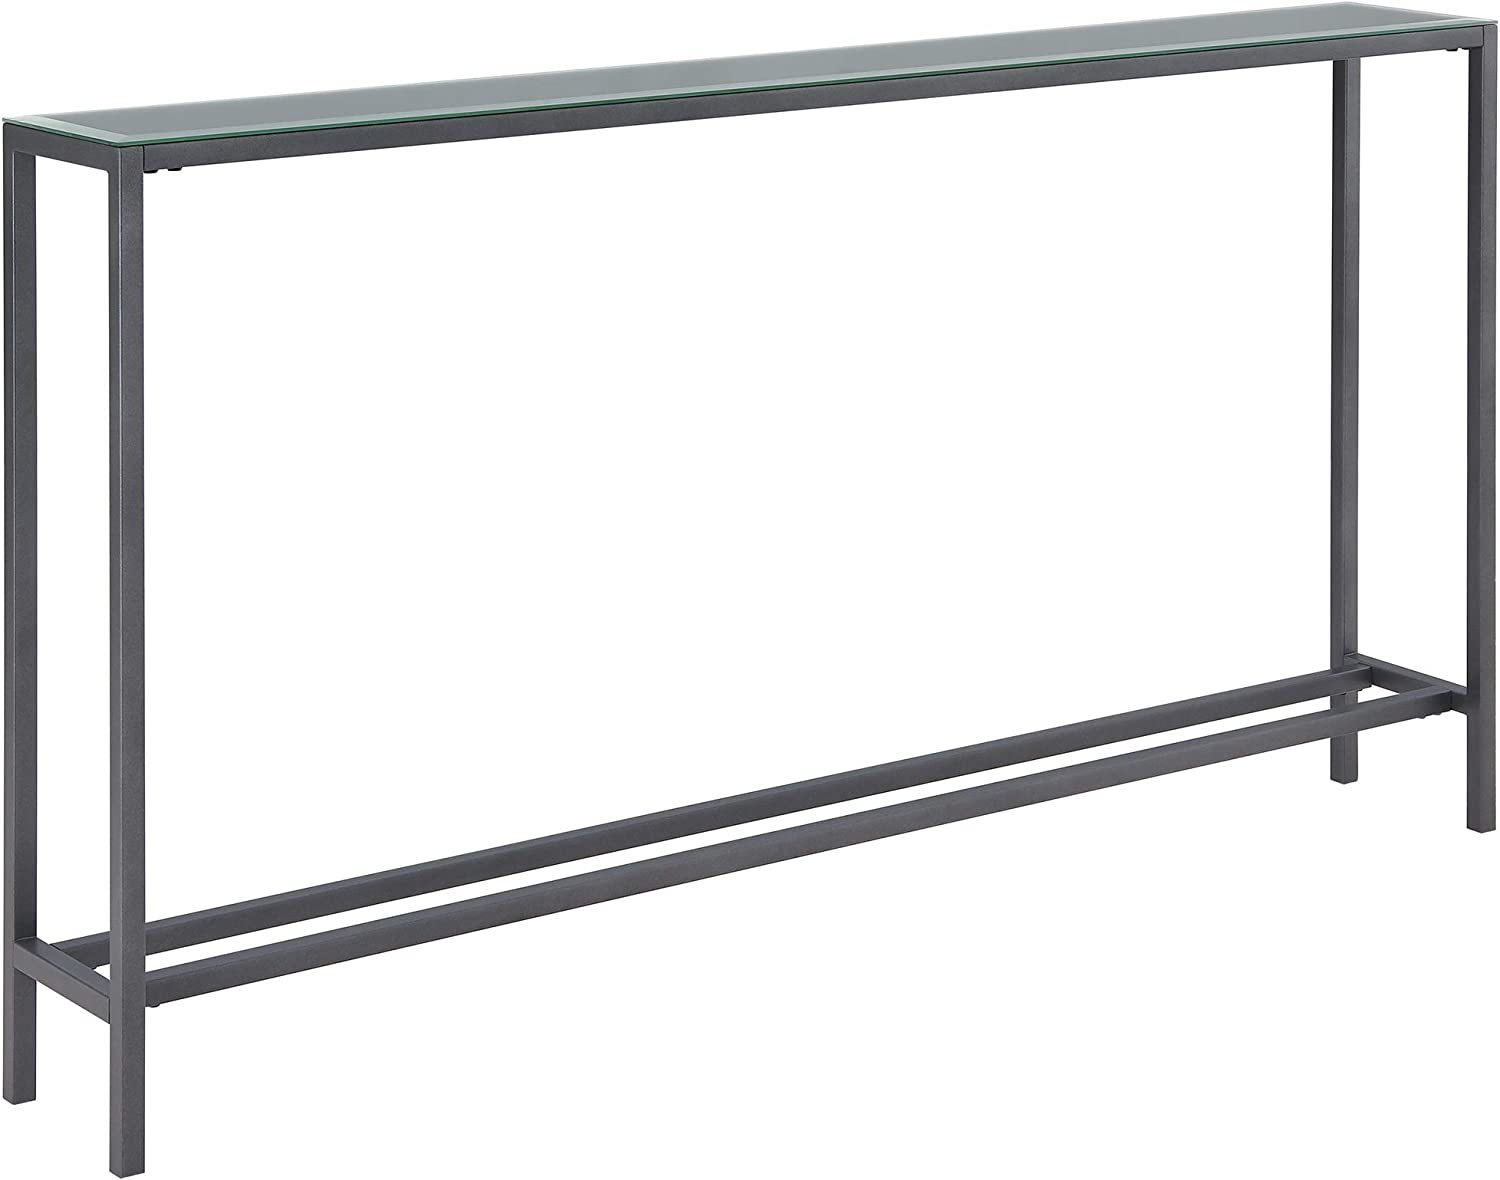 The Gray Darrin Console Table From Southern Enterprises. - $188.92